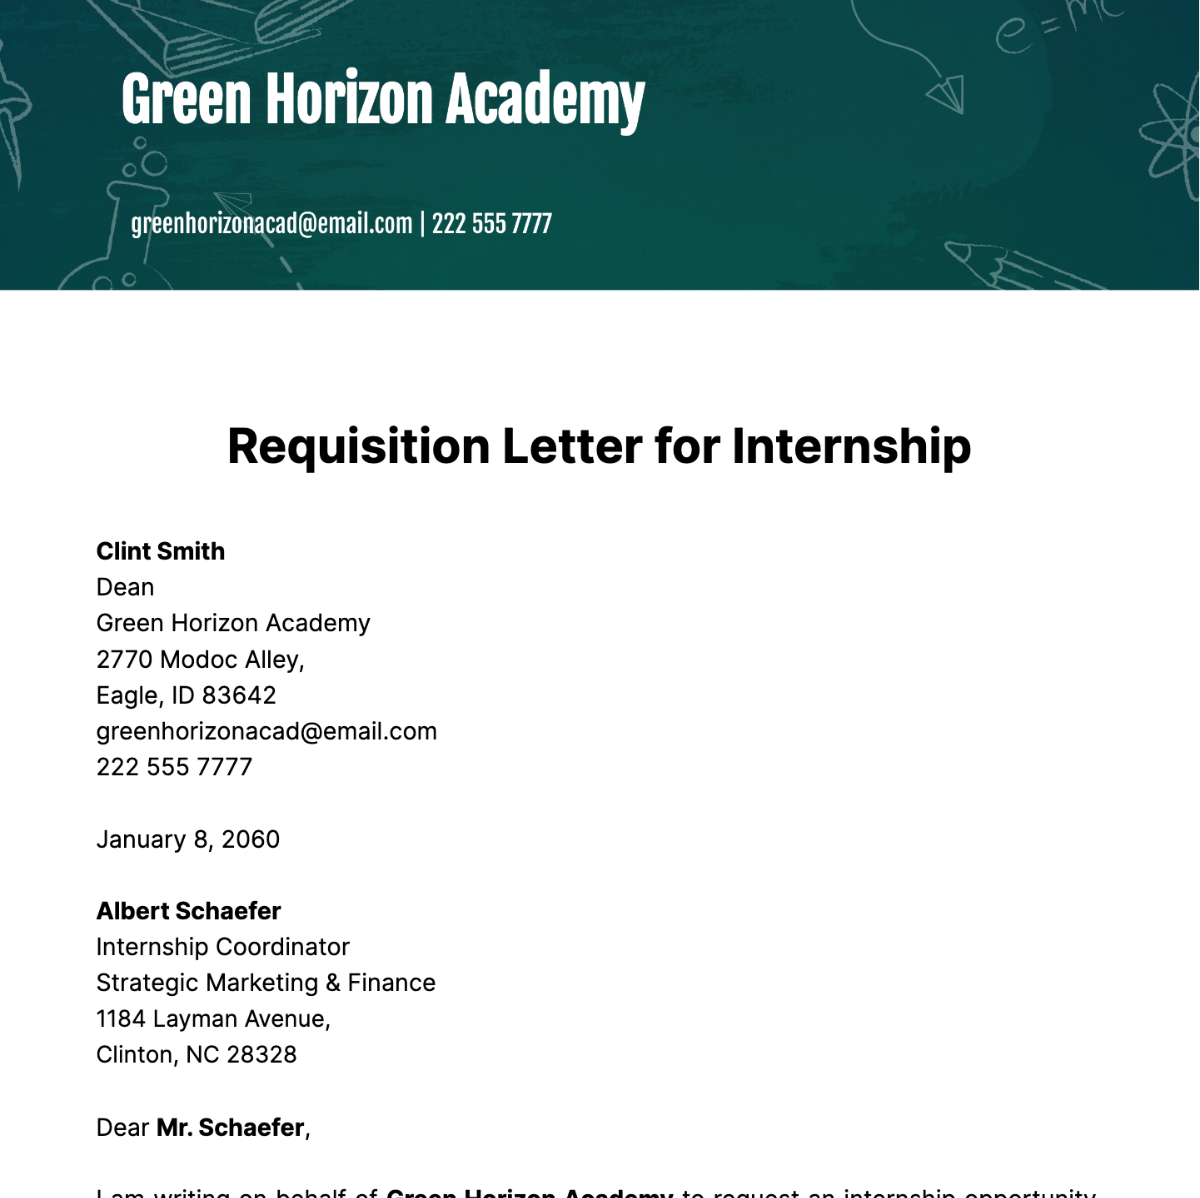 Requisition Letter for Internship Template